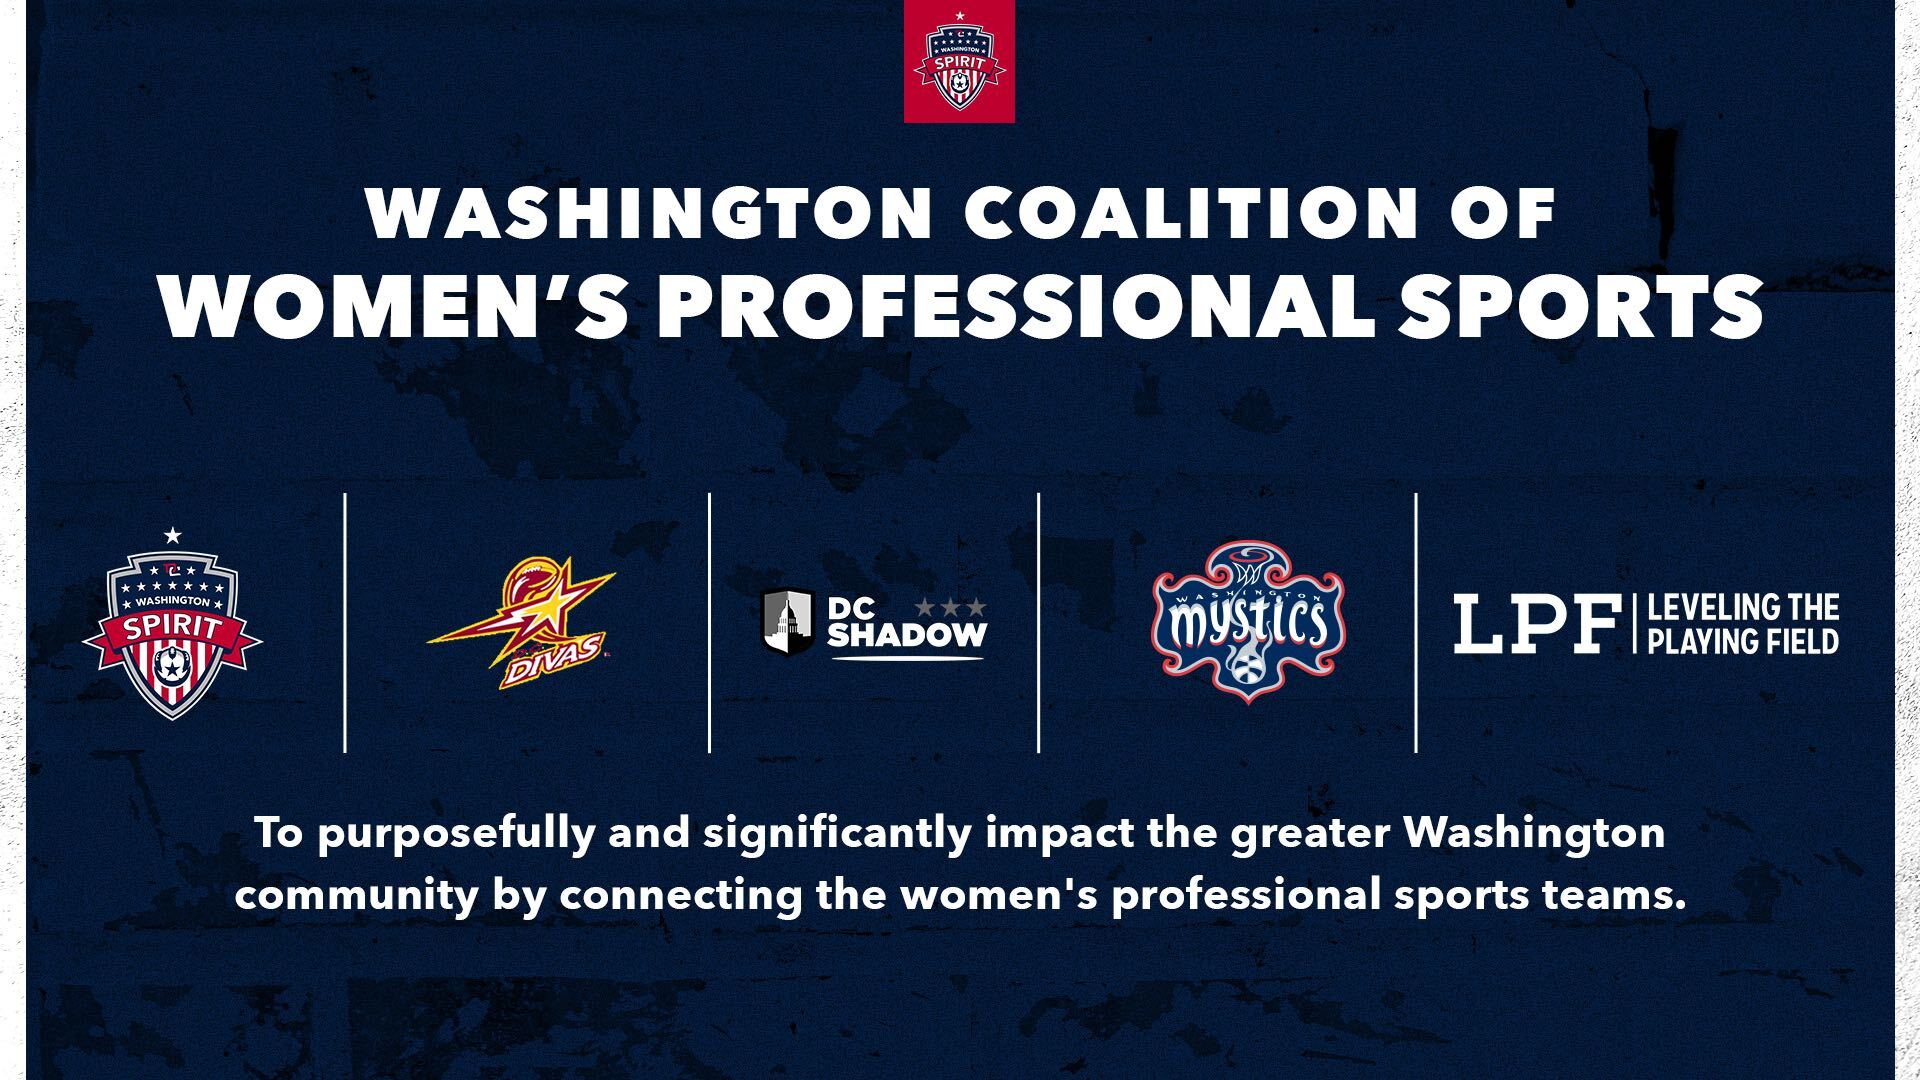 DC Professional Sports Teams Announce Creation of Washington Coalition of Women’s Professional Sports Featured Image